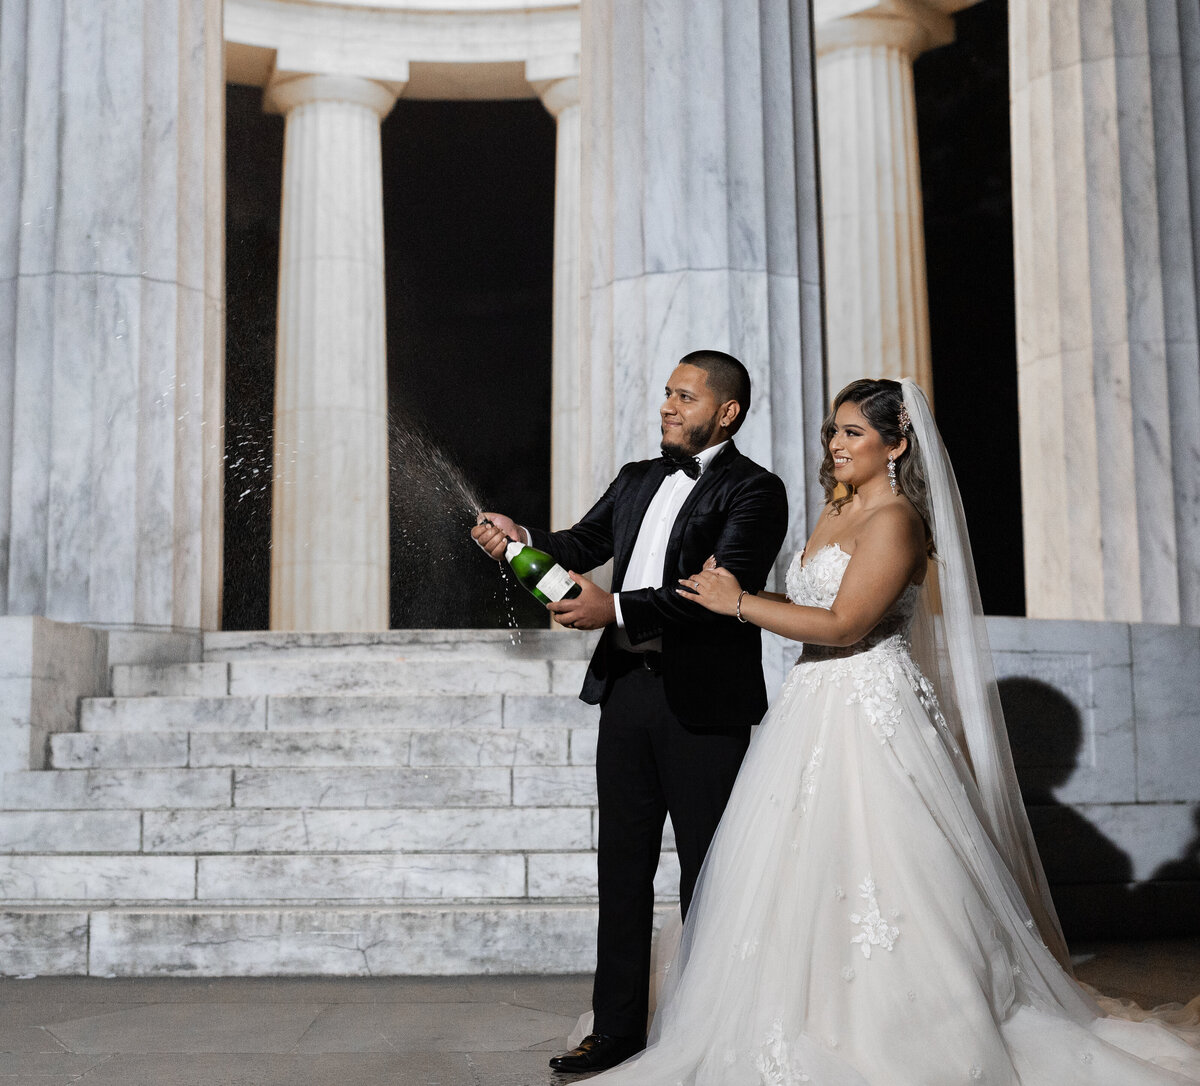 bride and groom spraying champagne wearing black suit and white dress in washington dc